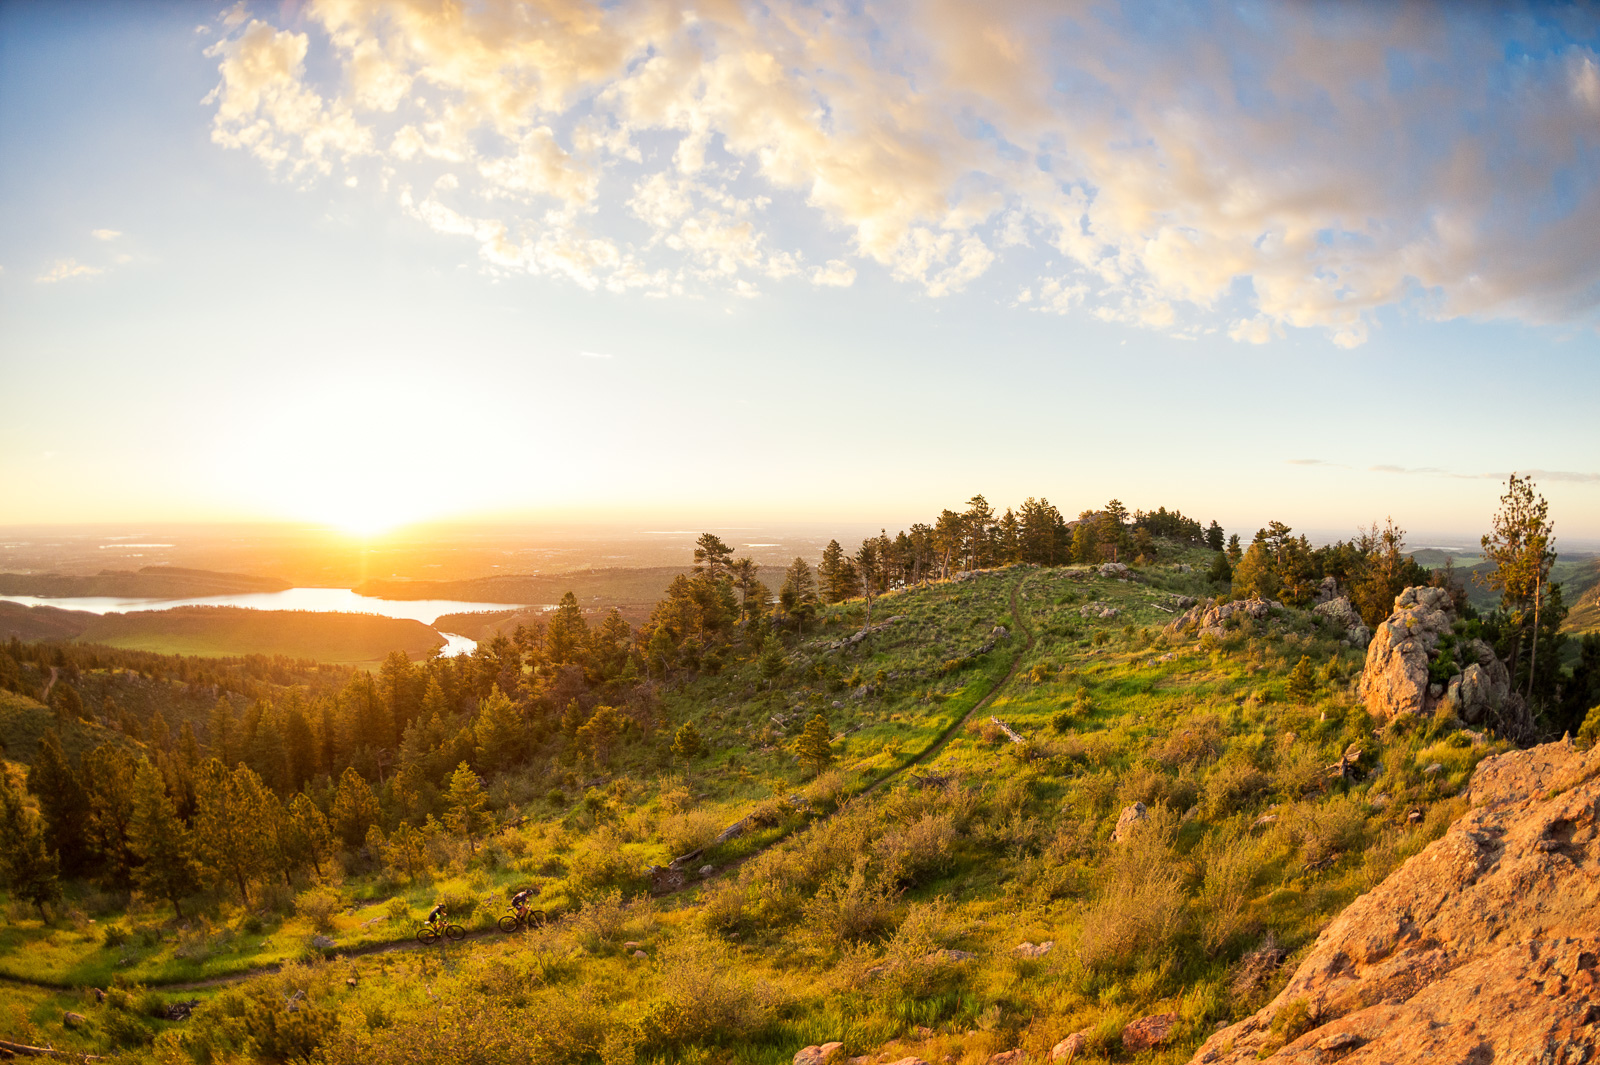 Sunrise over the Midwest is one of my favorite views in Fort Collins, and this is probably my favorite image of it. Garrett Gerchar and Brad Cole riding Stout Trail at Horsetooth Mountain Park near Fort Collins, CO